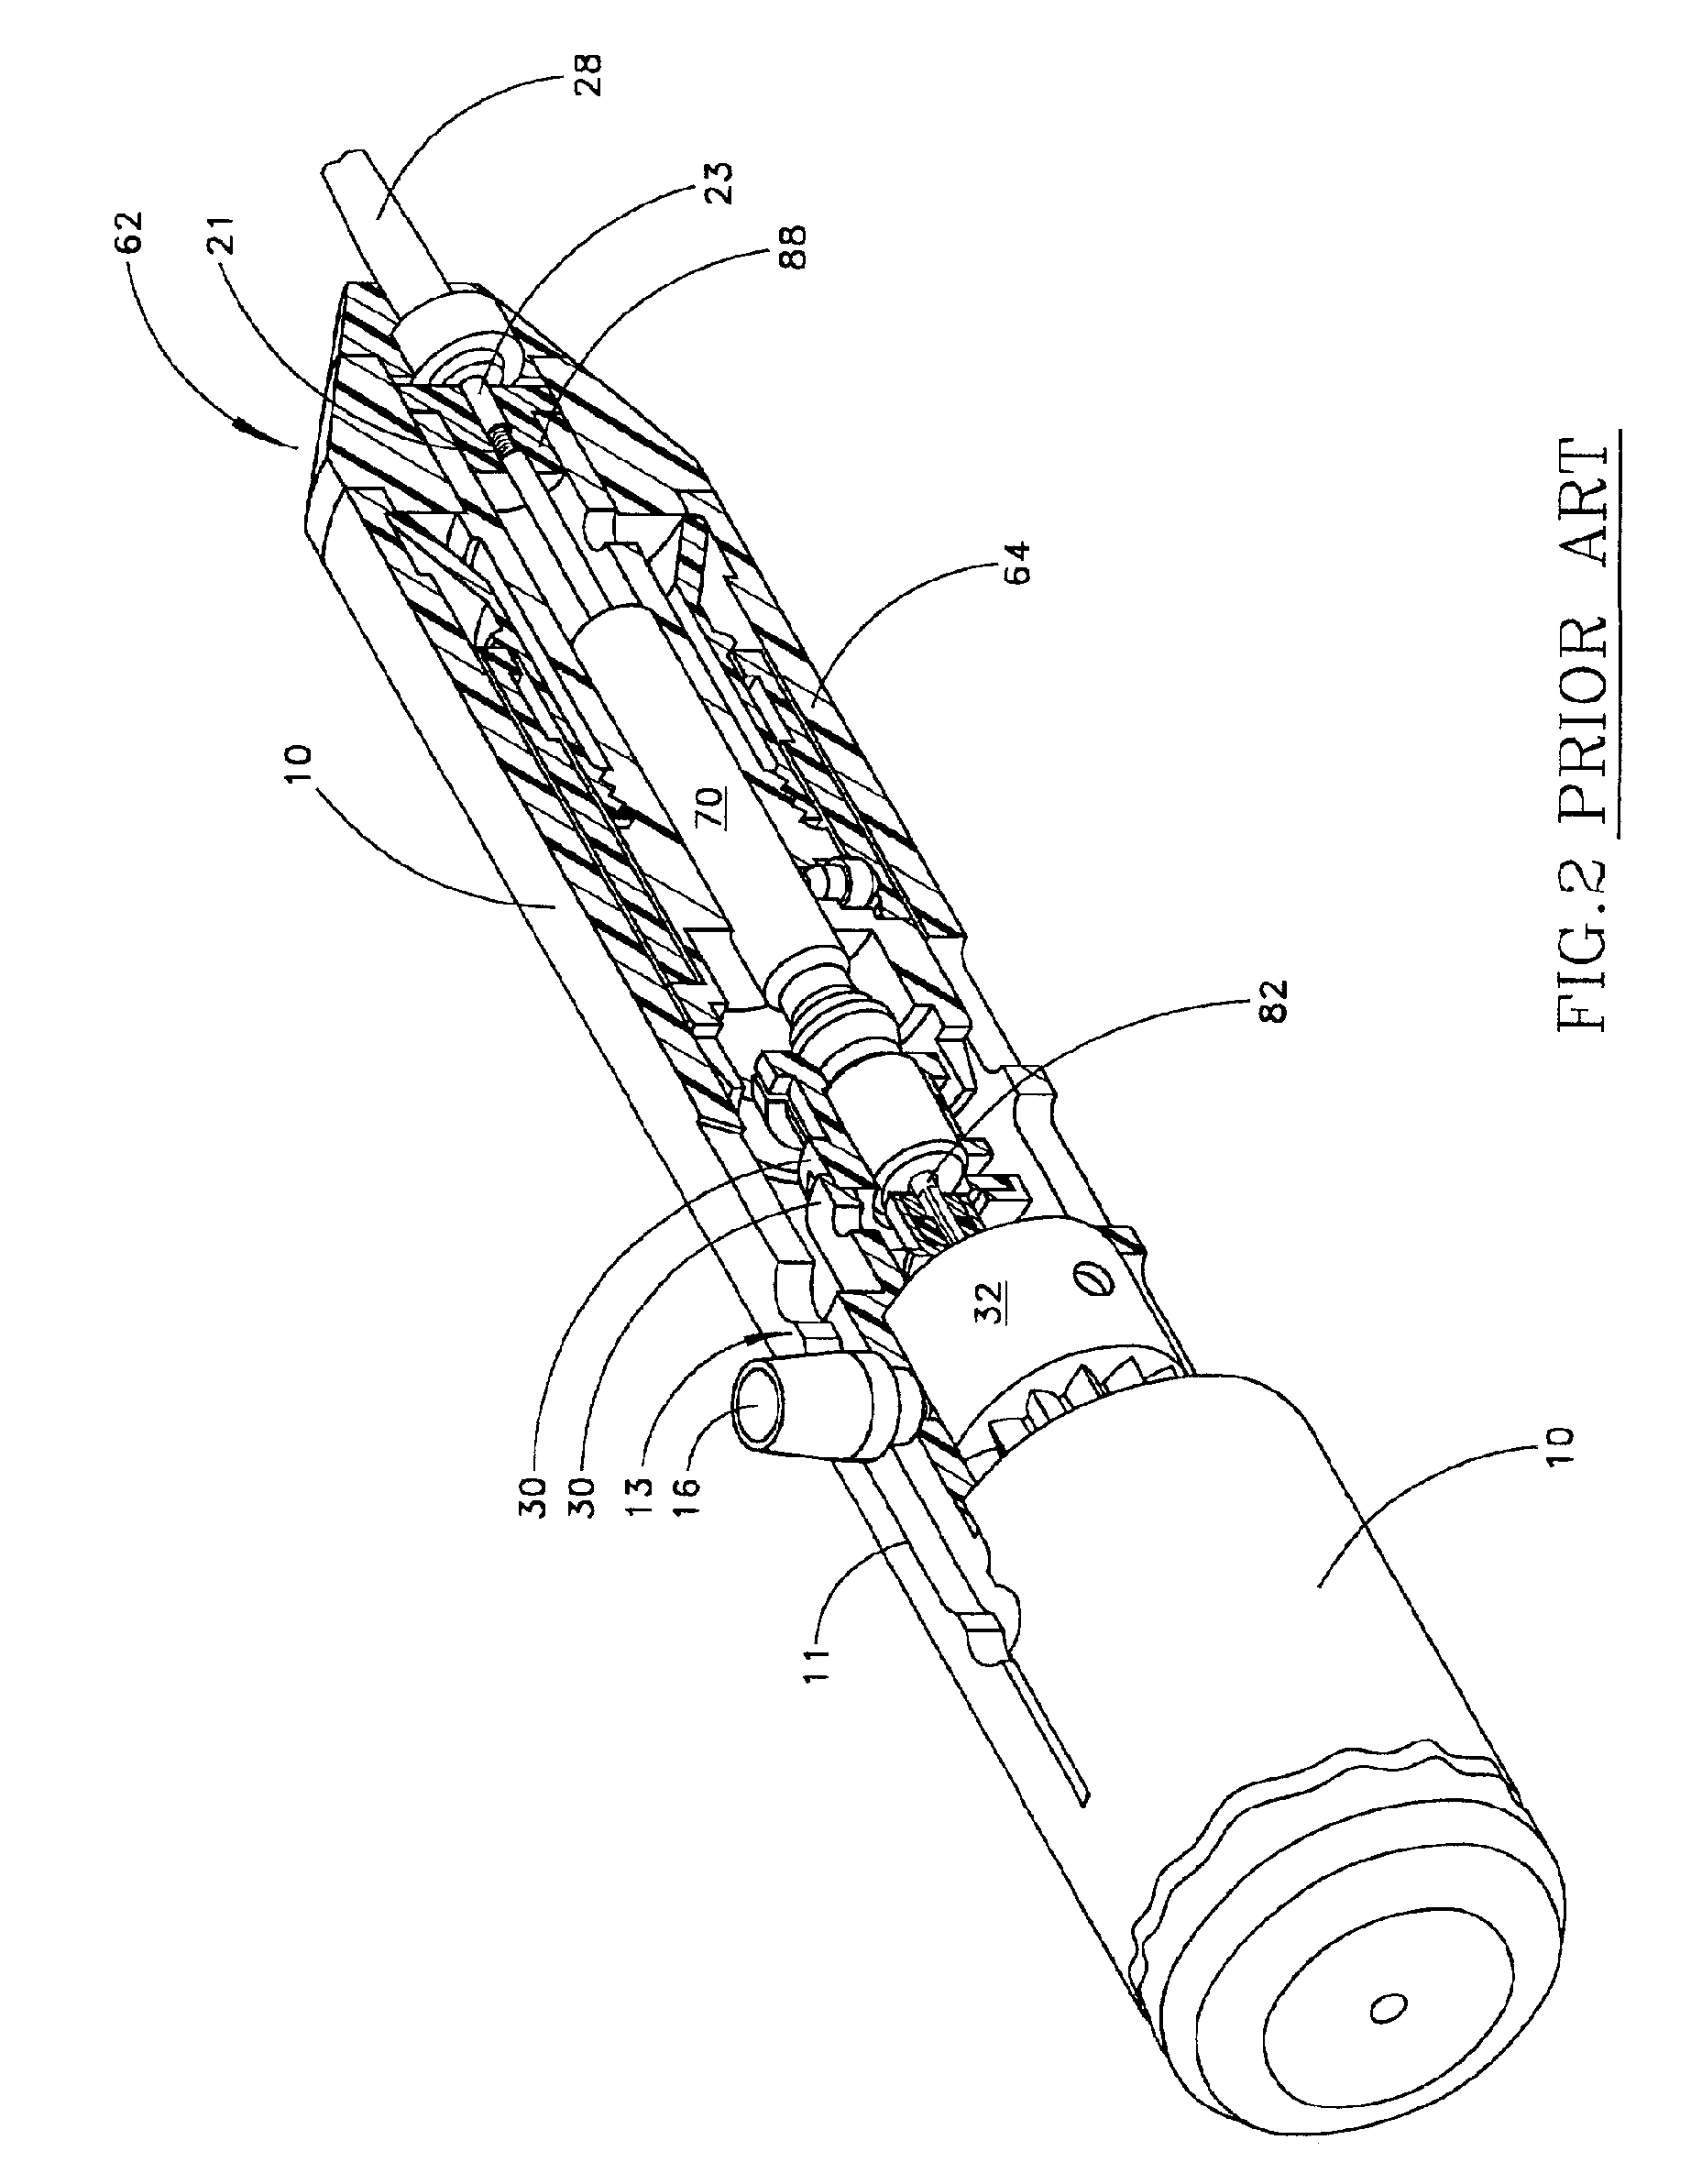 Rotational atherectomy device with keyed exchangeable drive shaft